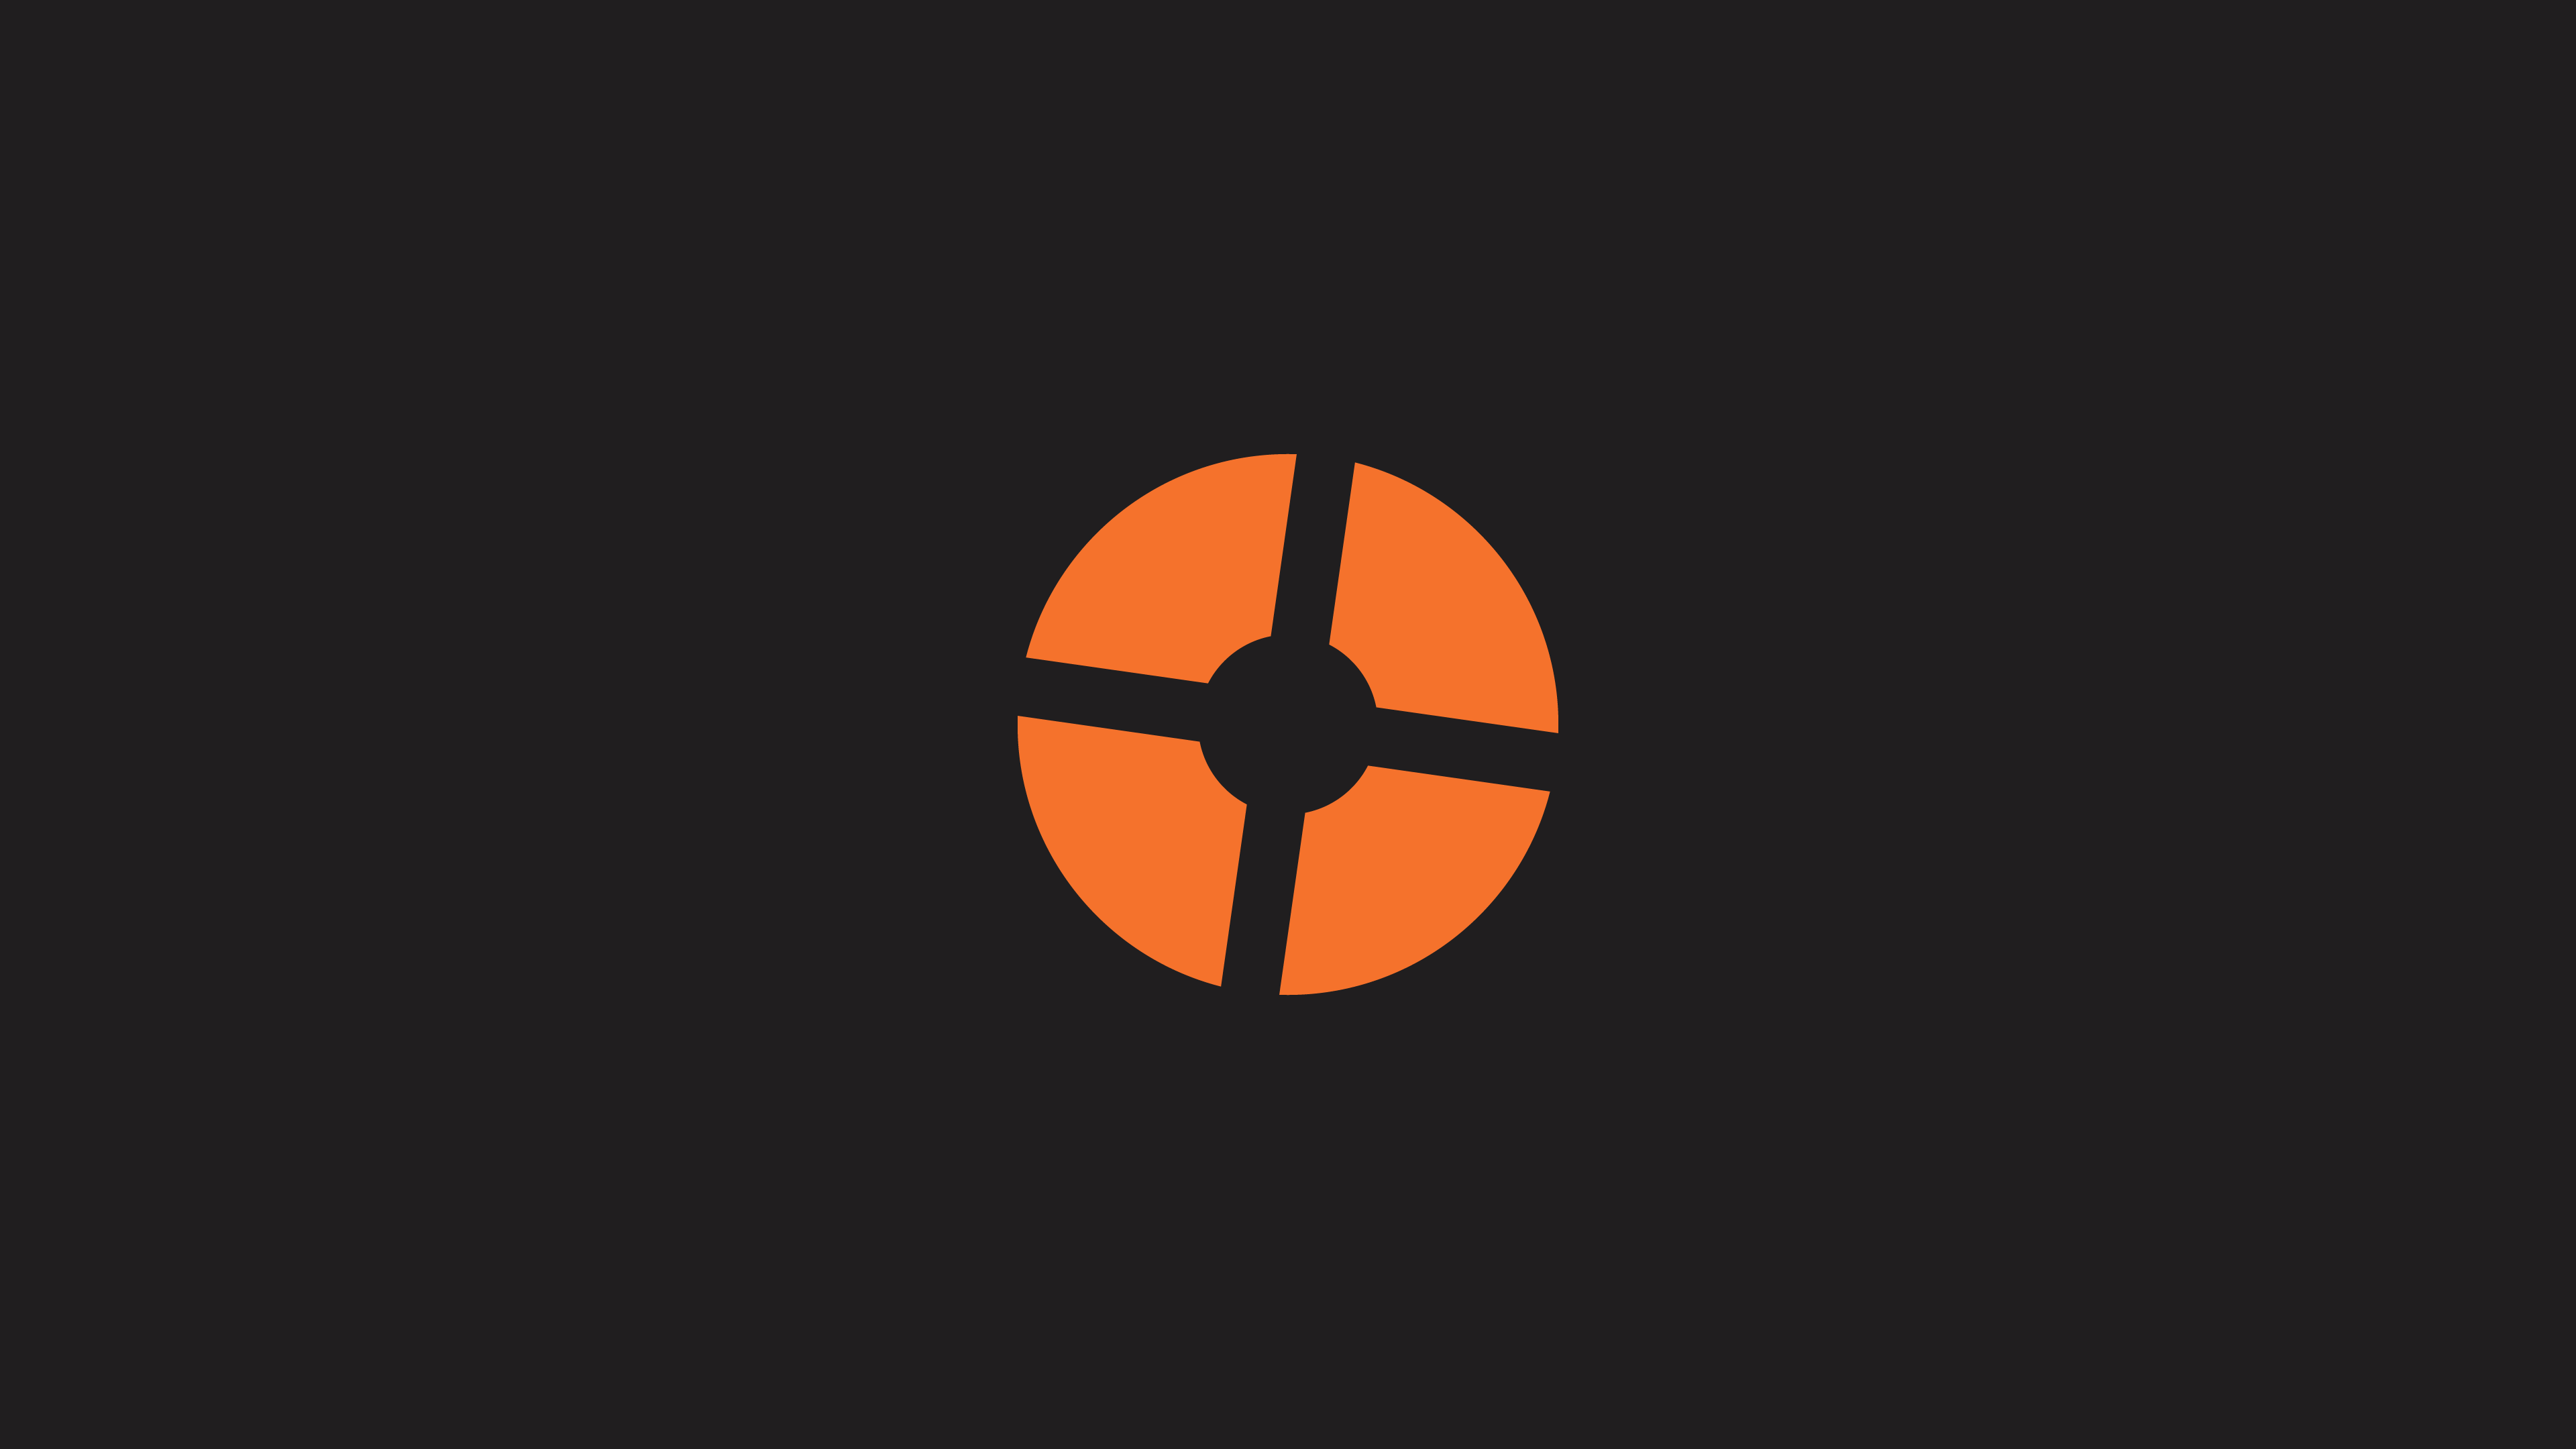 4K TF2 Wallpaper AMOLED Wallpaper In Comments [1 5]